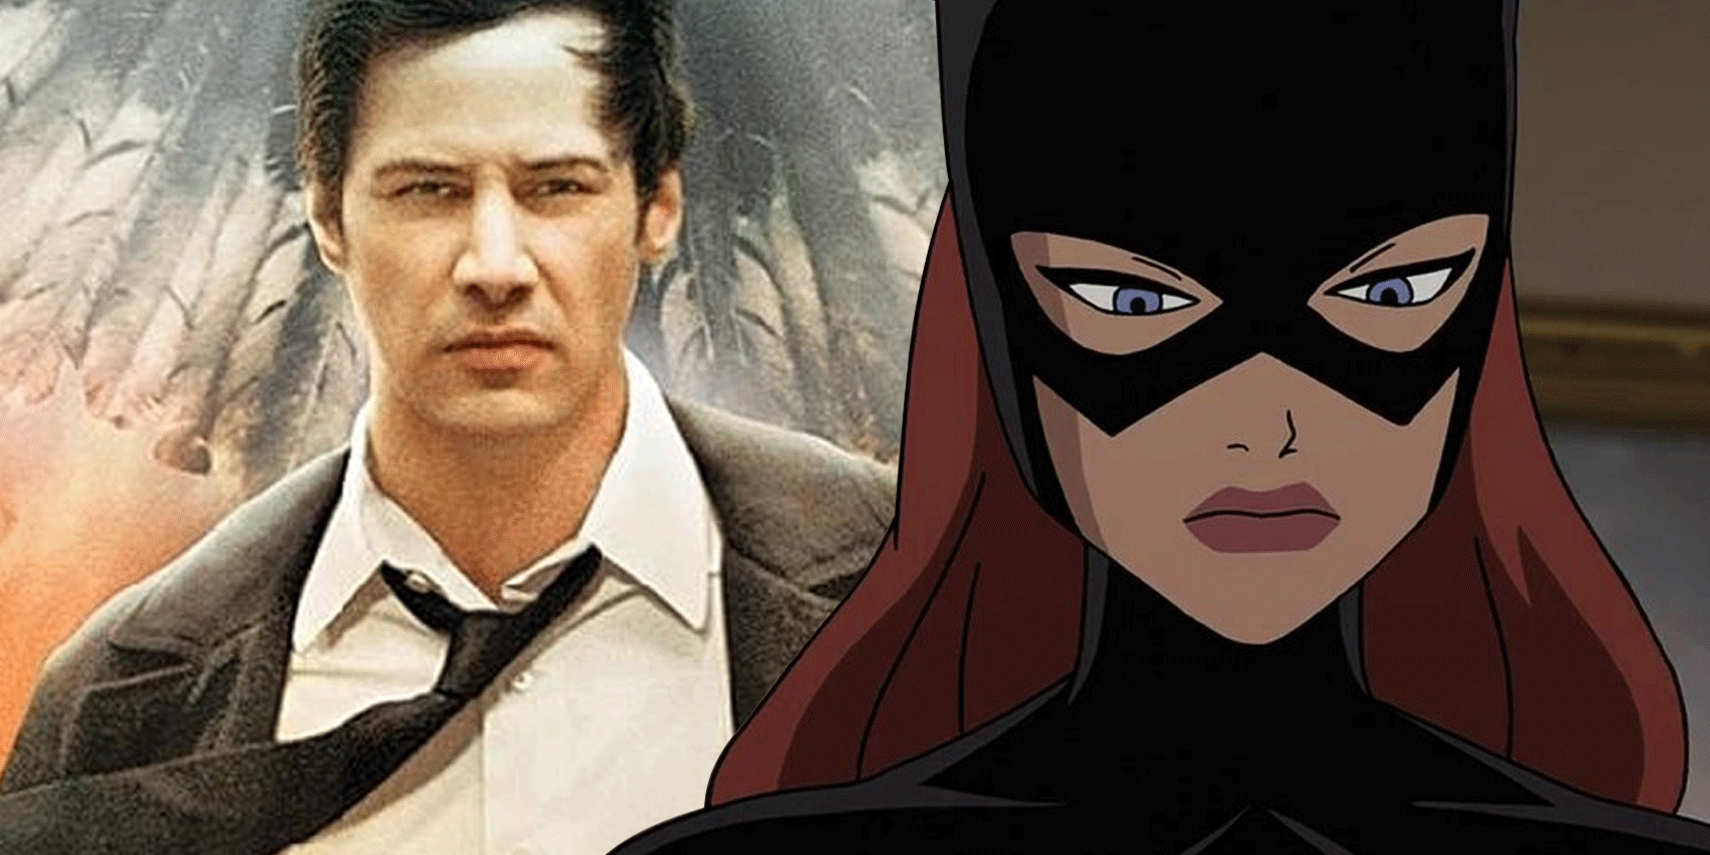 A split image of Keanu Reeves' Constantine and an animated Batgirl